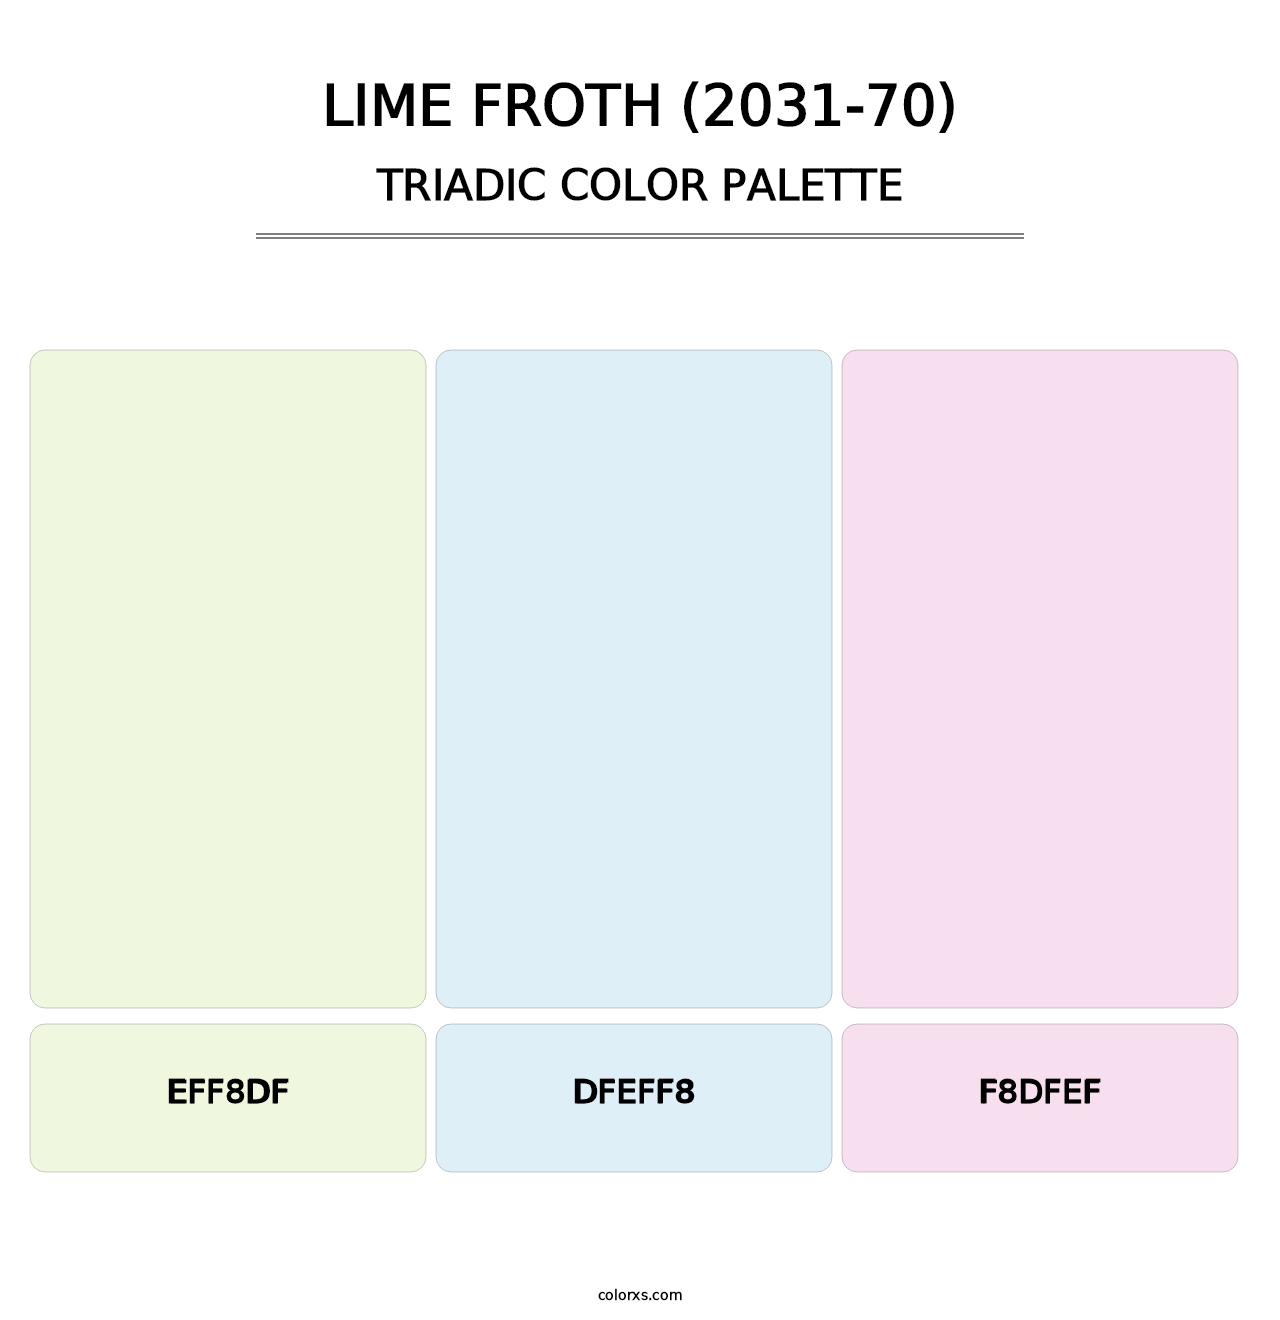 Lime Froth (2031-70) - Triadic Color Palette